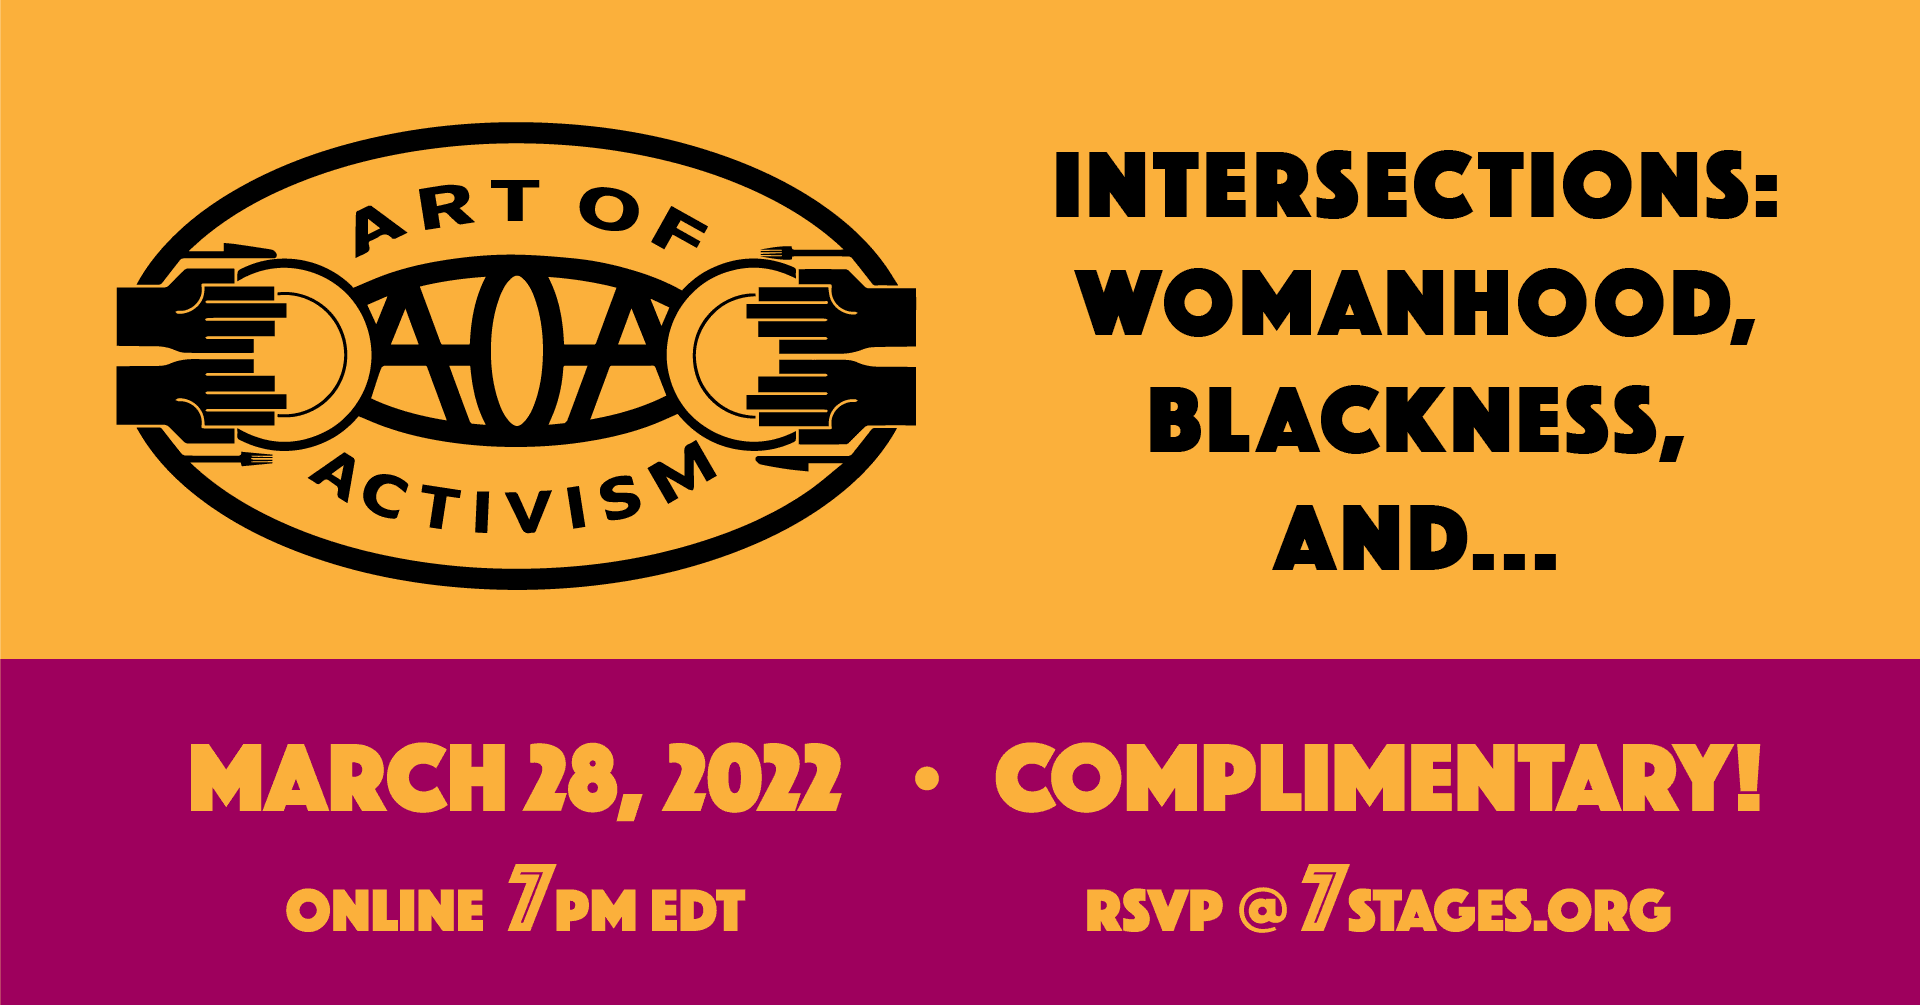 Art of Activism Intersections: Womanhood, Blackness, and... March 28, 2022. Online at 7 p.m. EDT. Complimentary. RSVP at 7Stages.org